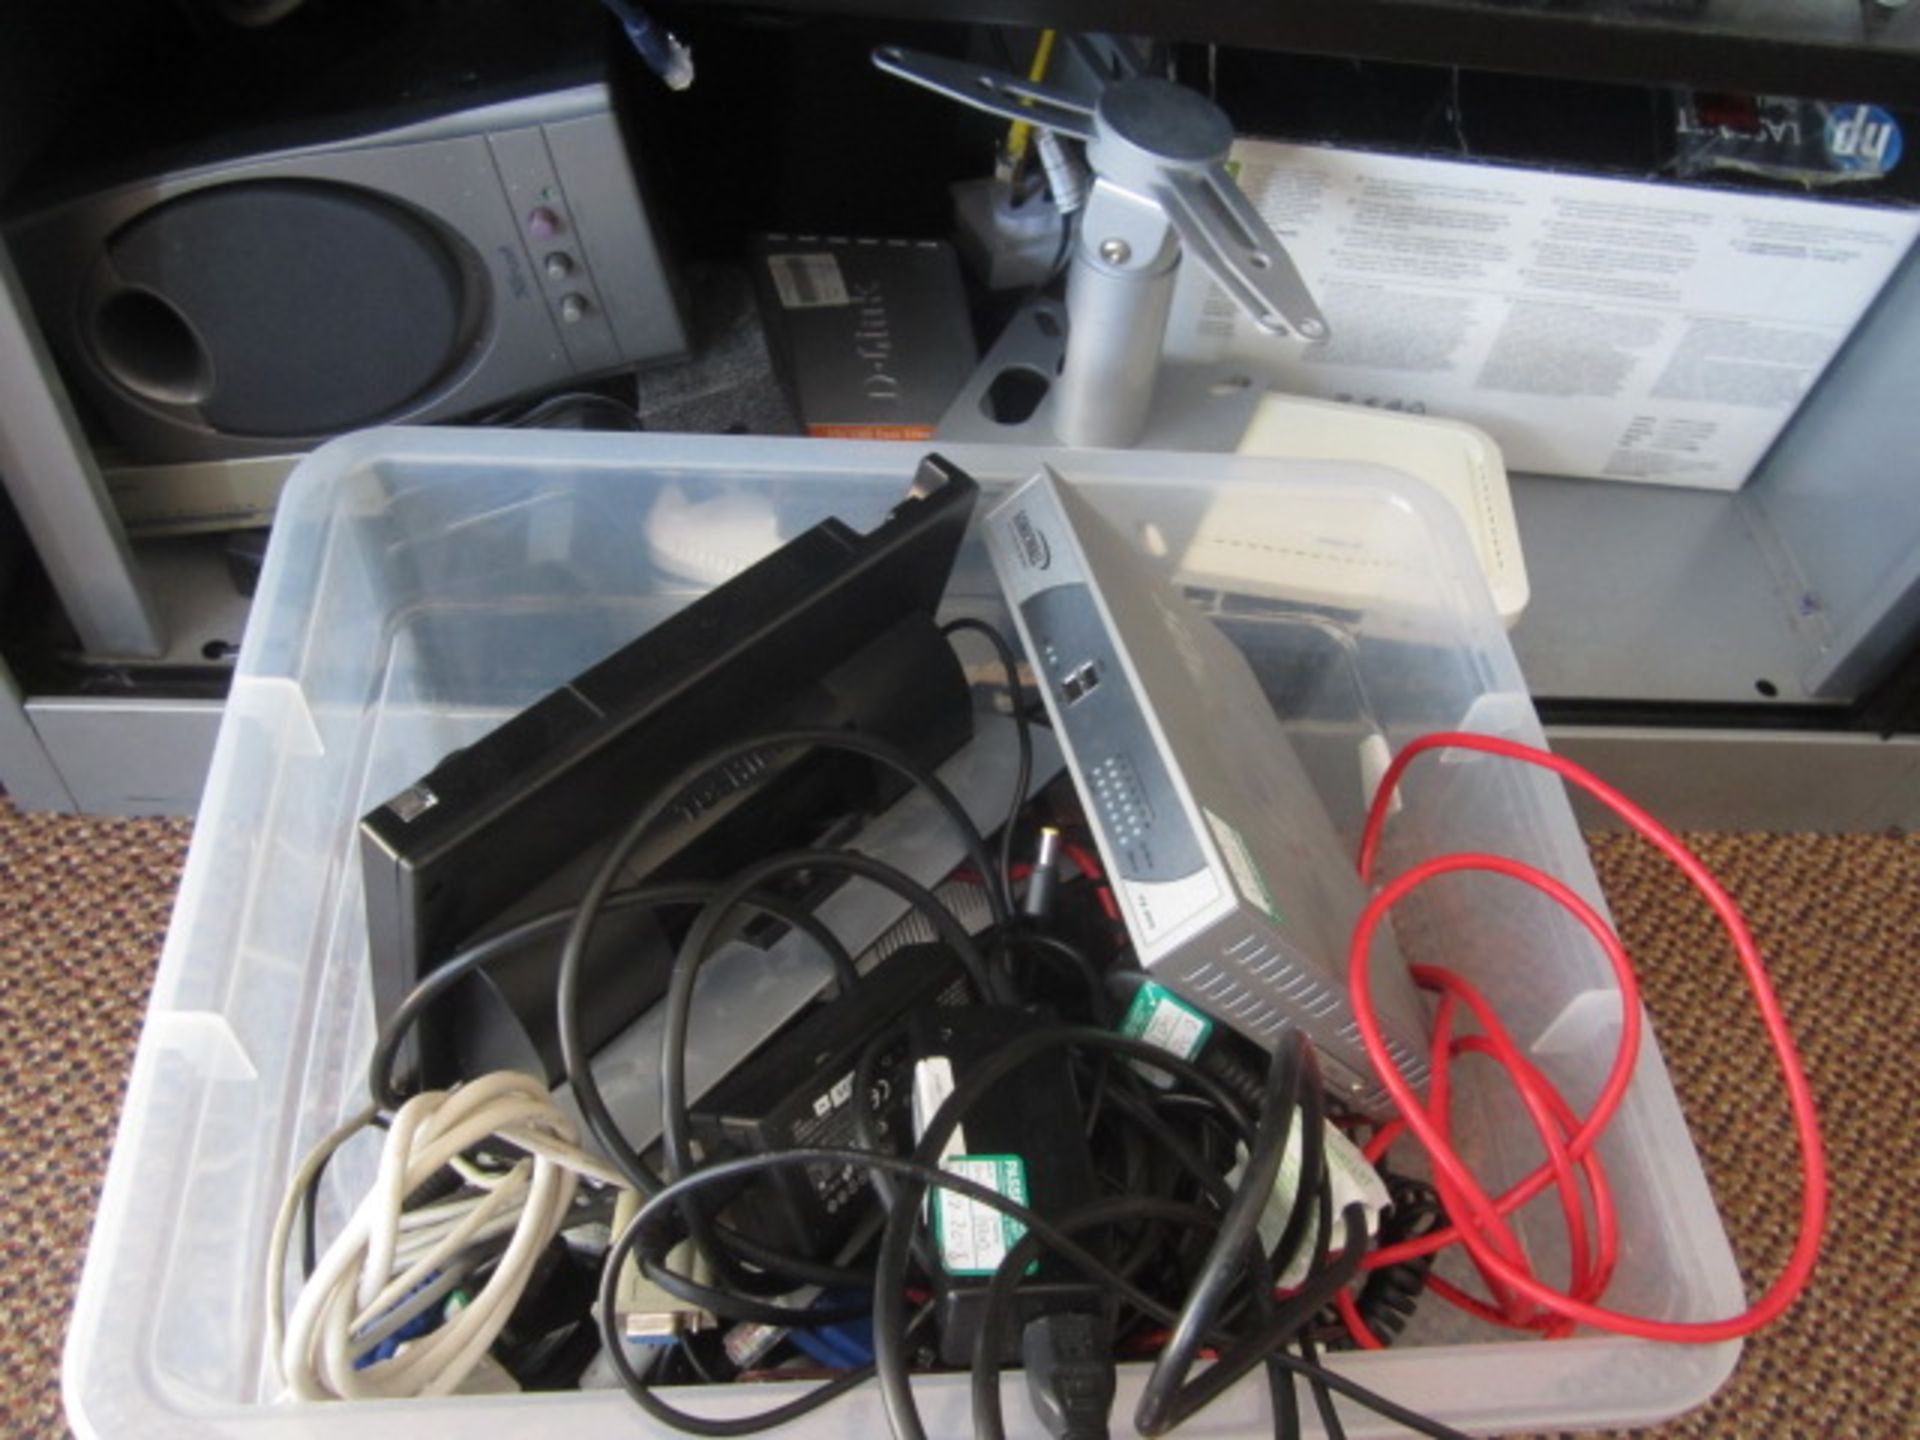 Remaining loose contents of IT equipment including 16 x assorted laptop - spares or repairs, X-VGA - Image 5 of 8